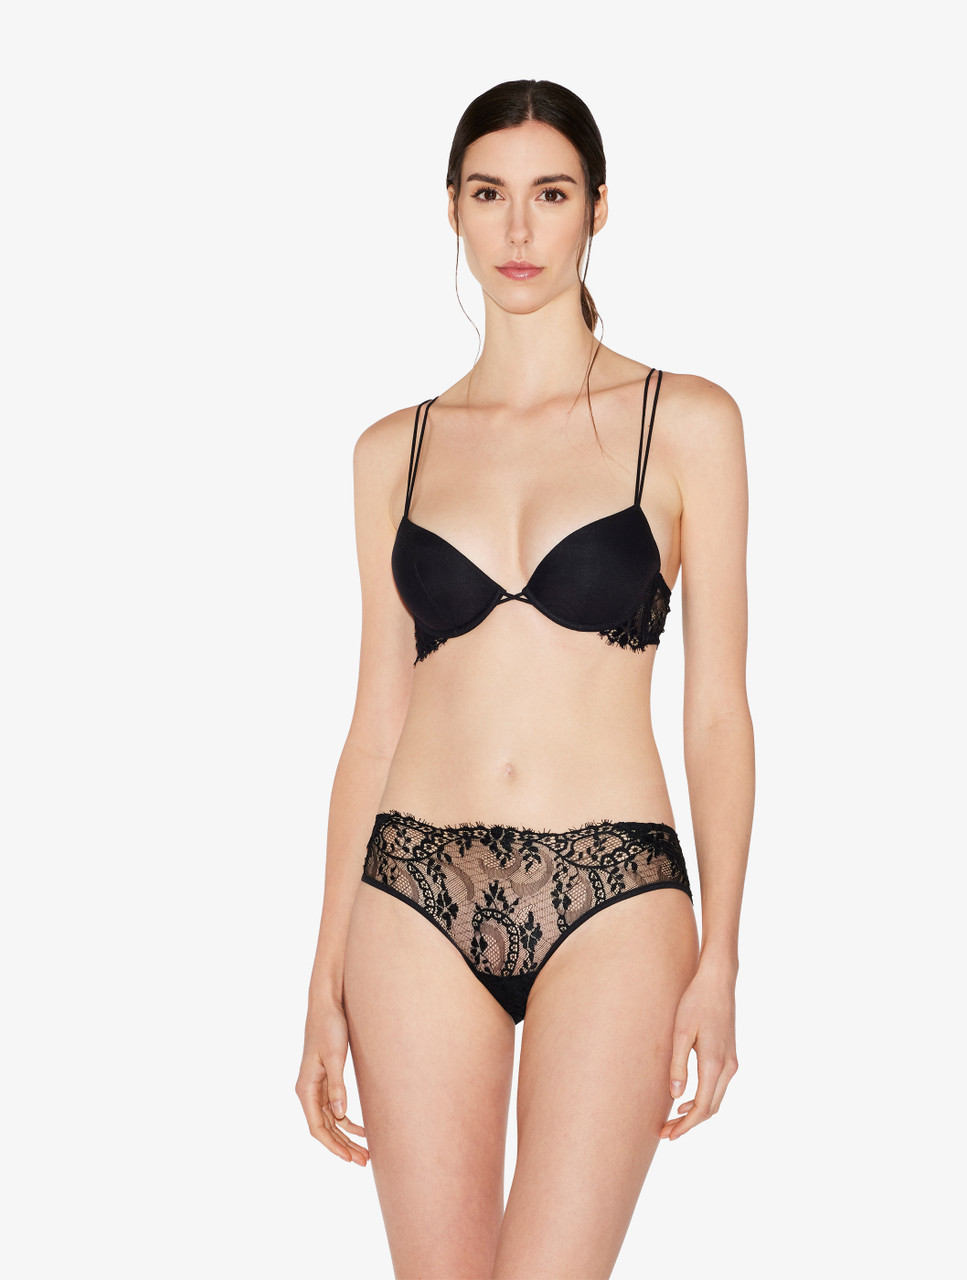 Off-white padded push-up bra with Leavers lace trim - La Perla - Russia